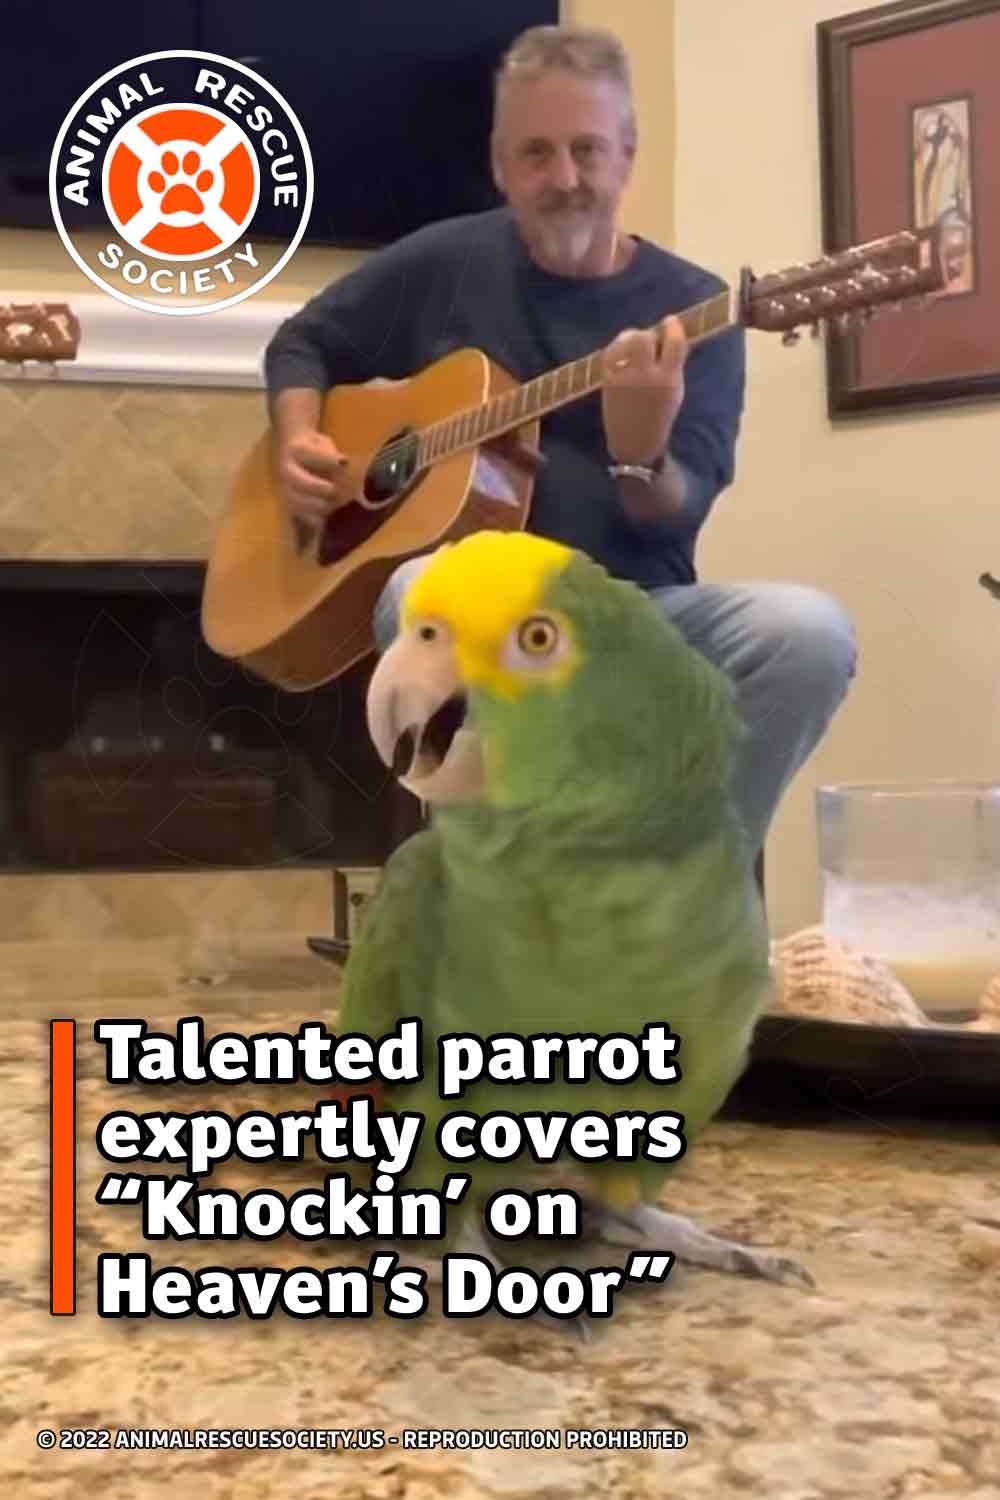 Talented parrot expertly covers “Knockin’ on Heaven’s Door”